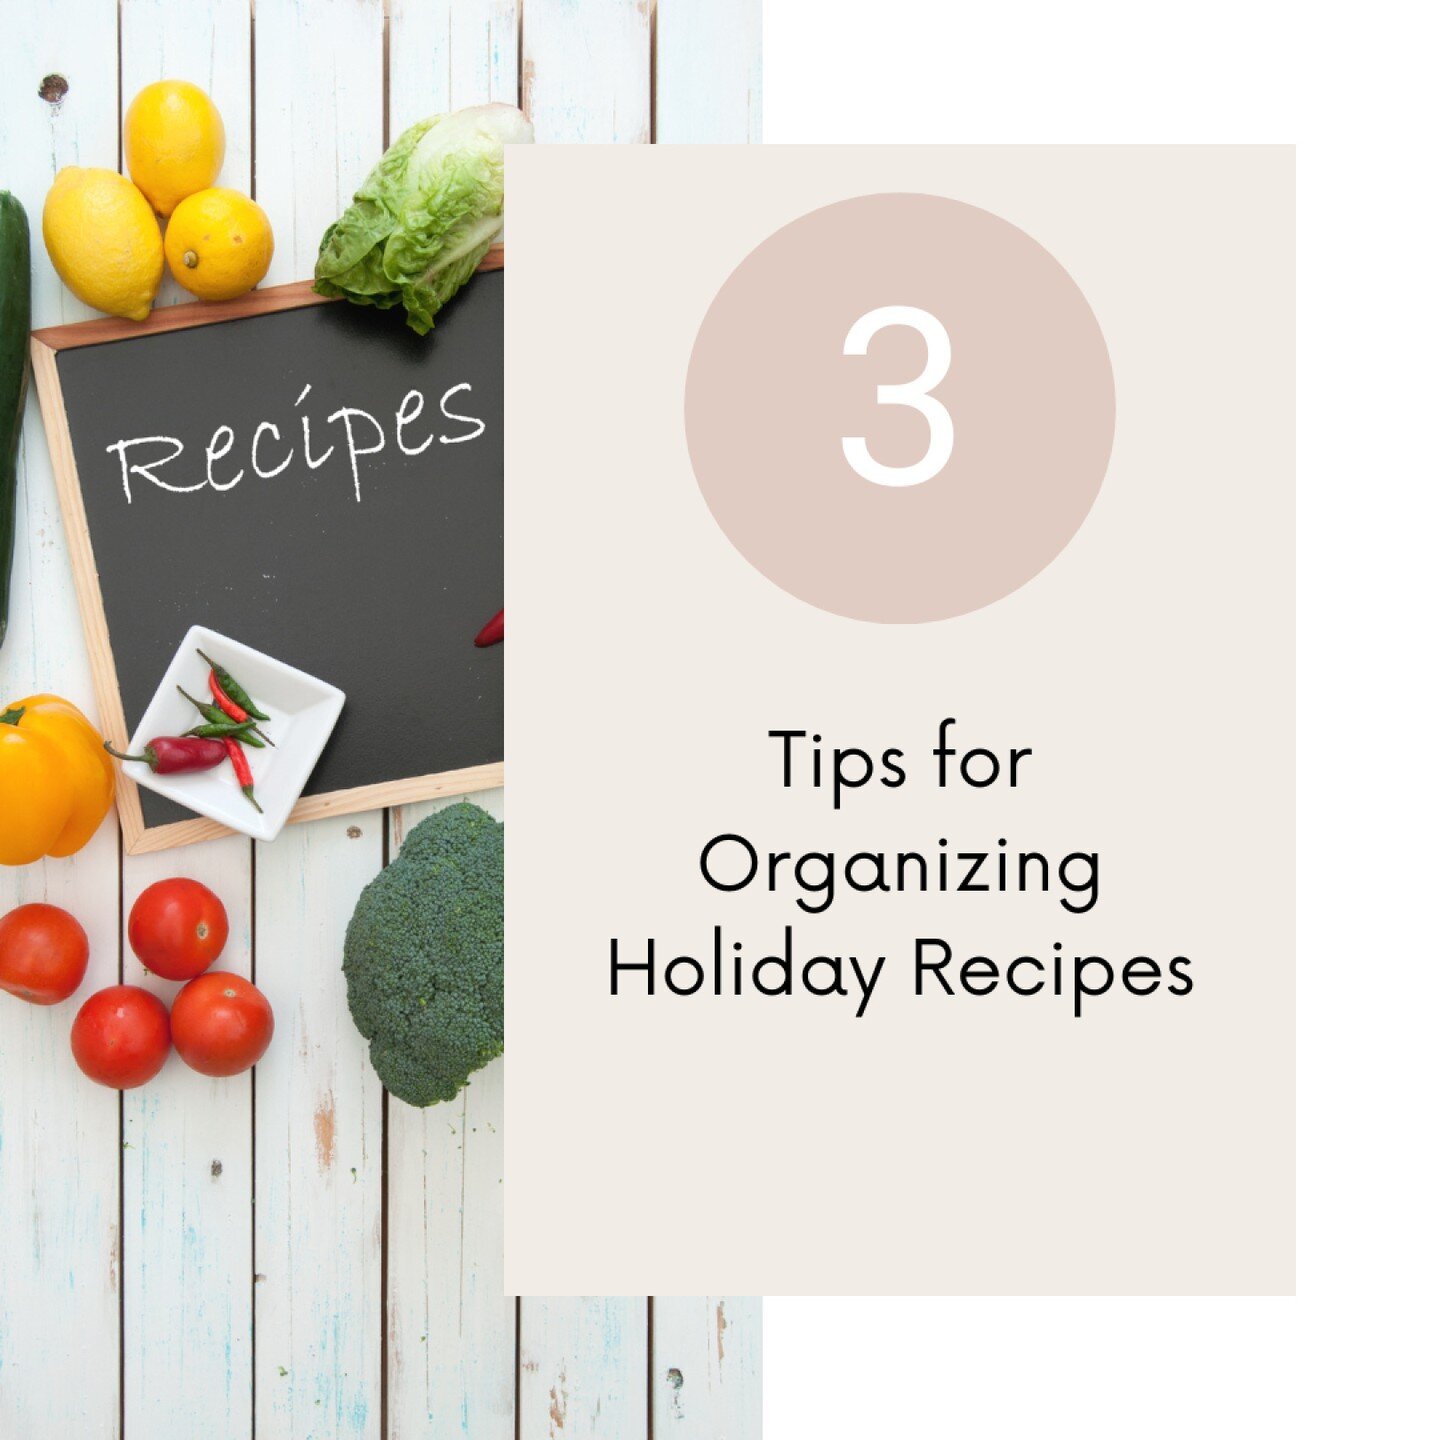 🍳✨ Ready to sprinkle some magic on your holiday recipes? 🎄📚 Let's make organizing your culinary adventures a piece of cake with these tips:

📱 1. Embrace the Digital Kitchen: Say bye-bye to dusty cookbooks! Use apps like #Paprika or #Pinterest to